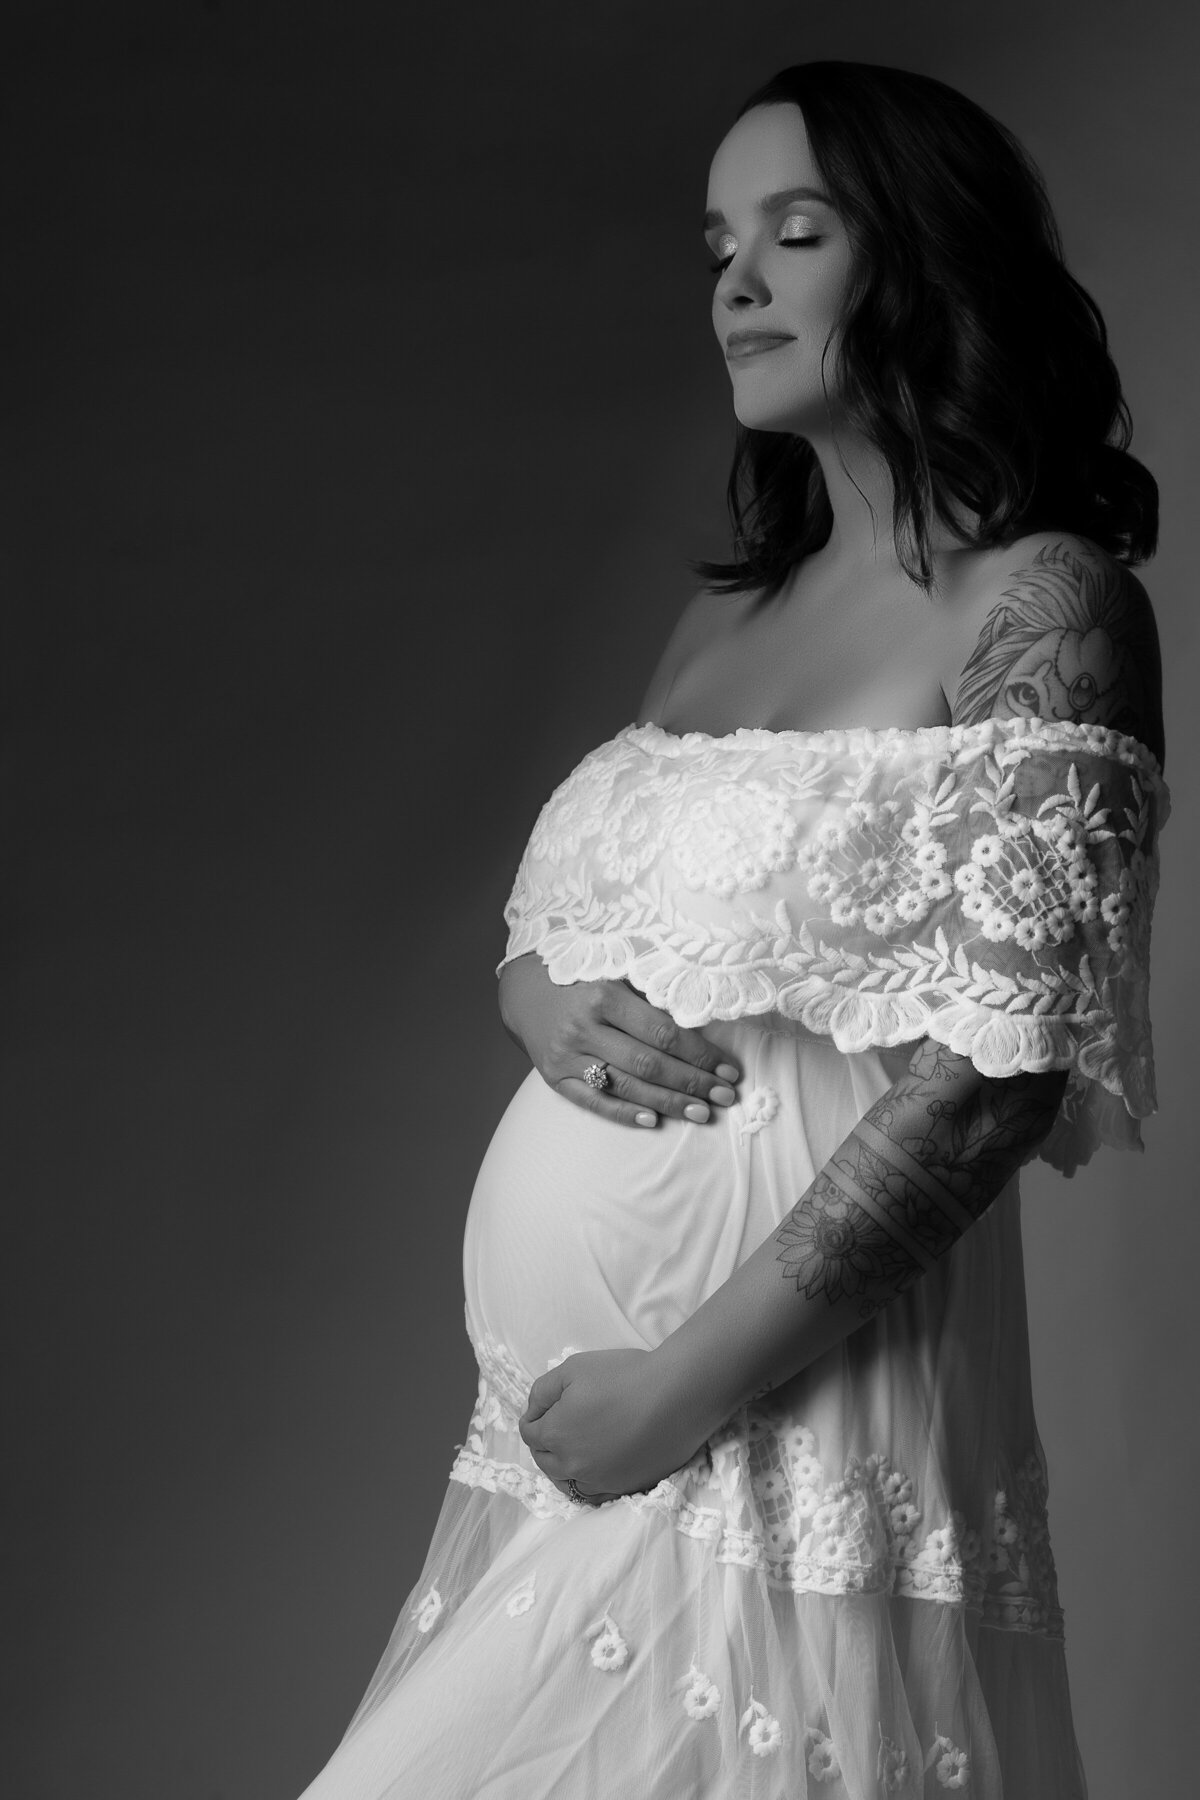 In BW Raleigh NC Maternity Portrait Photographer 13